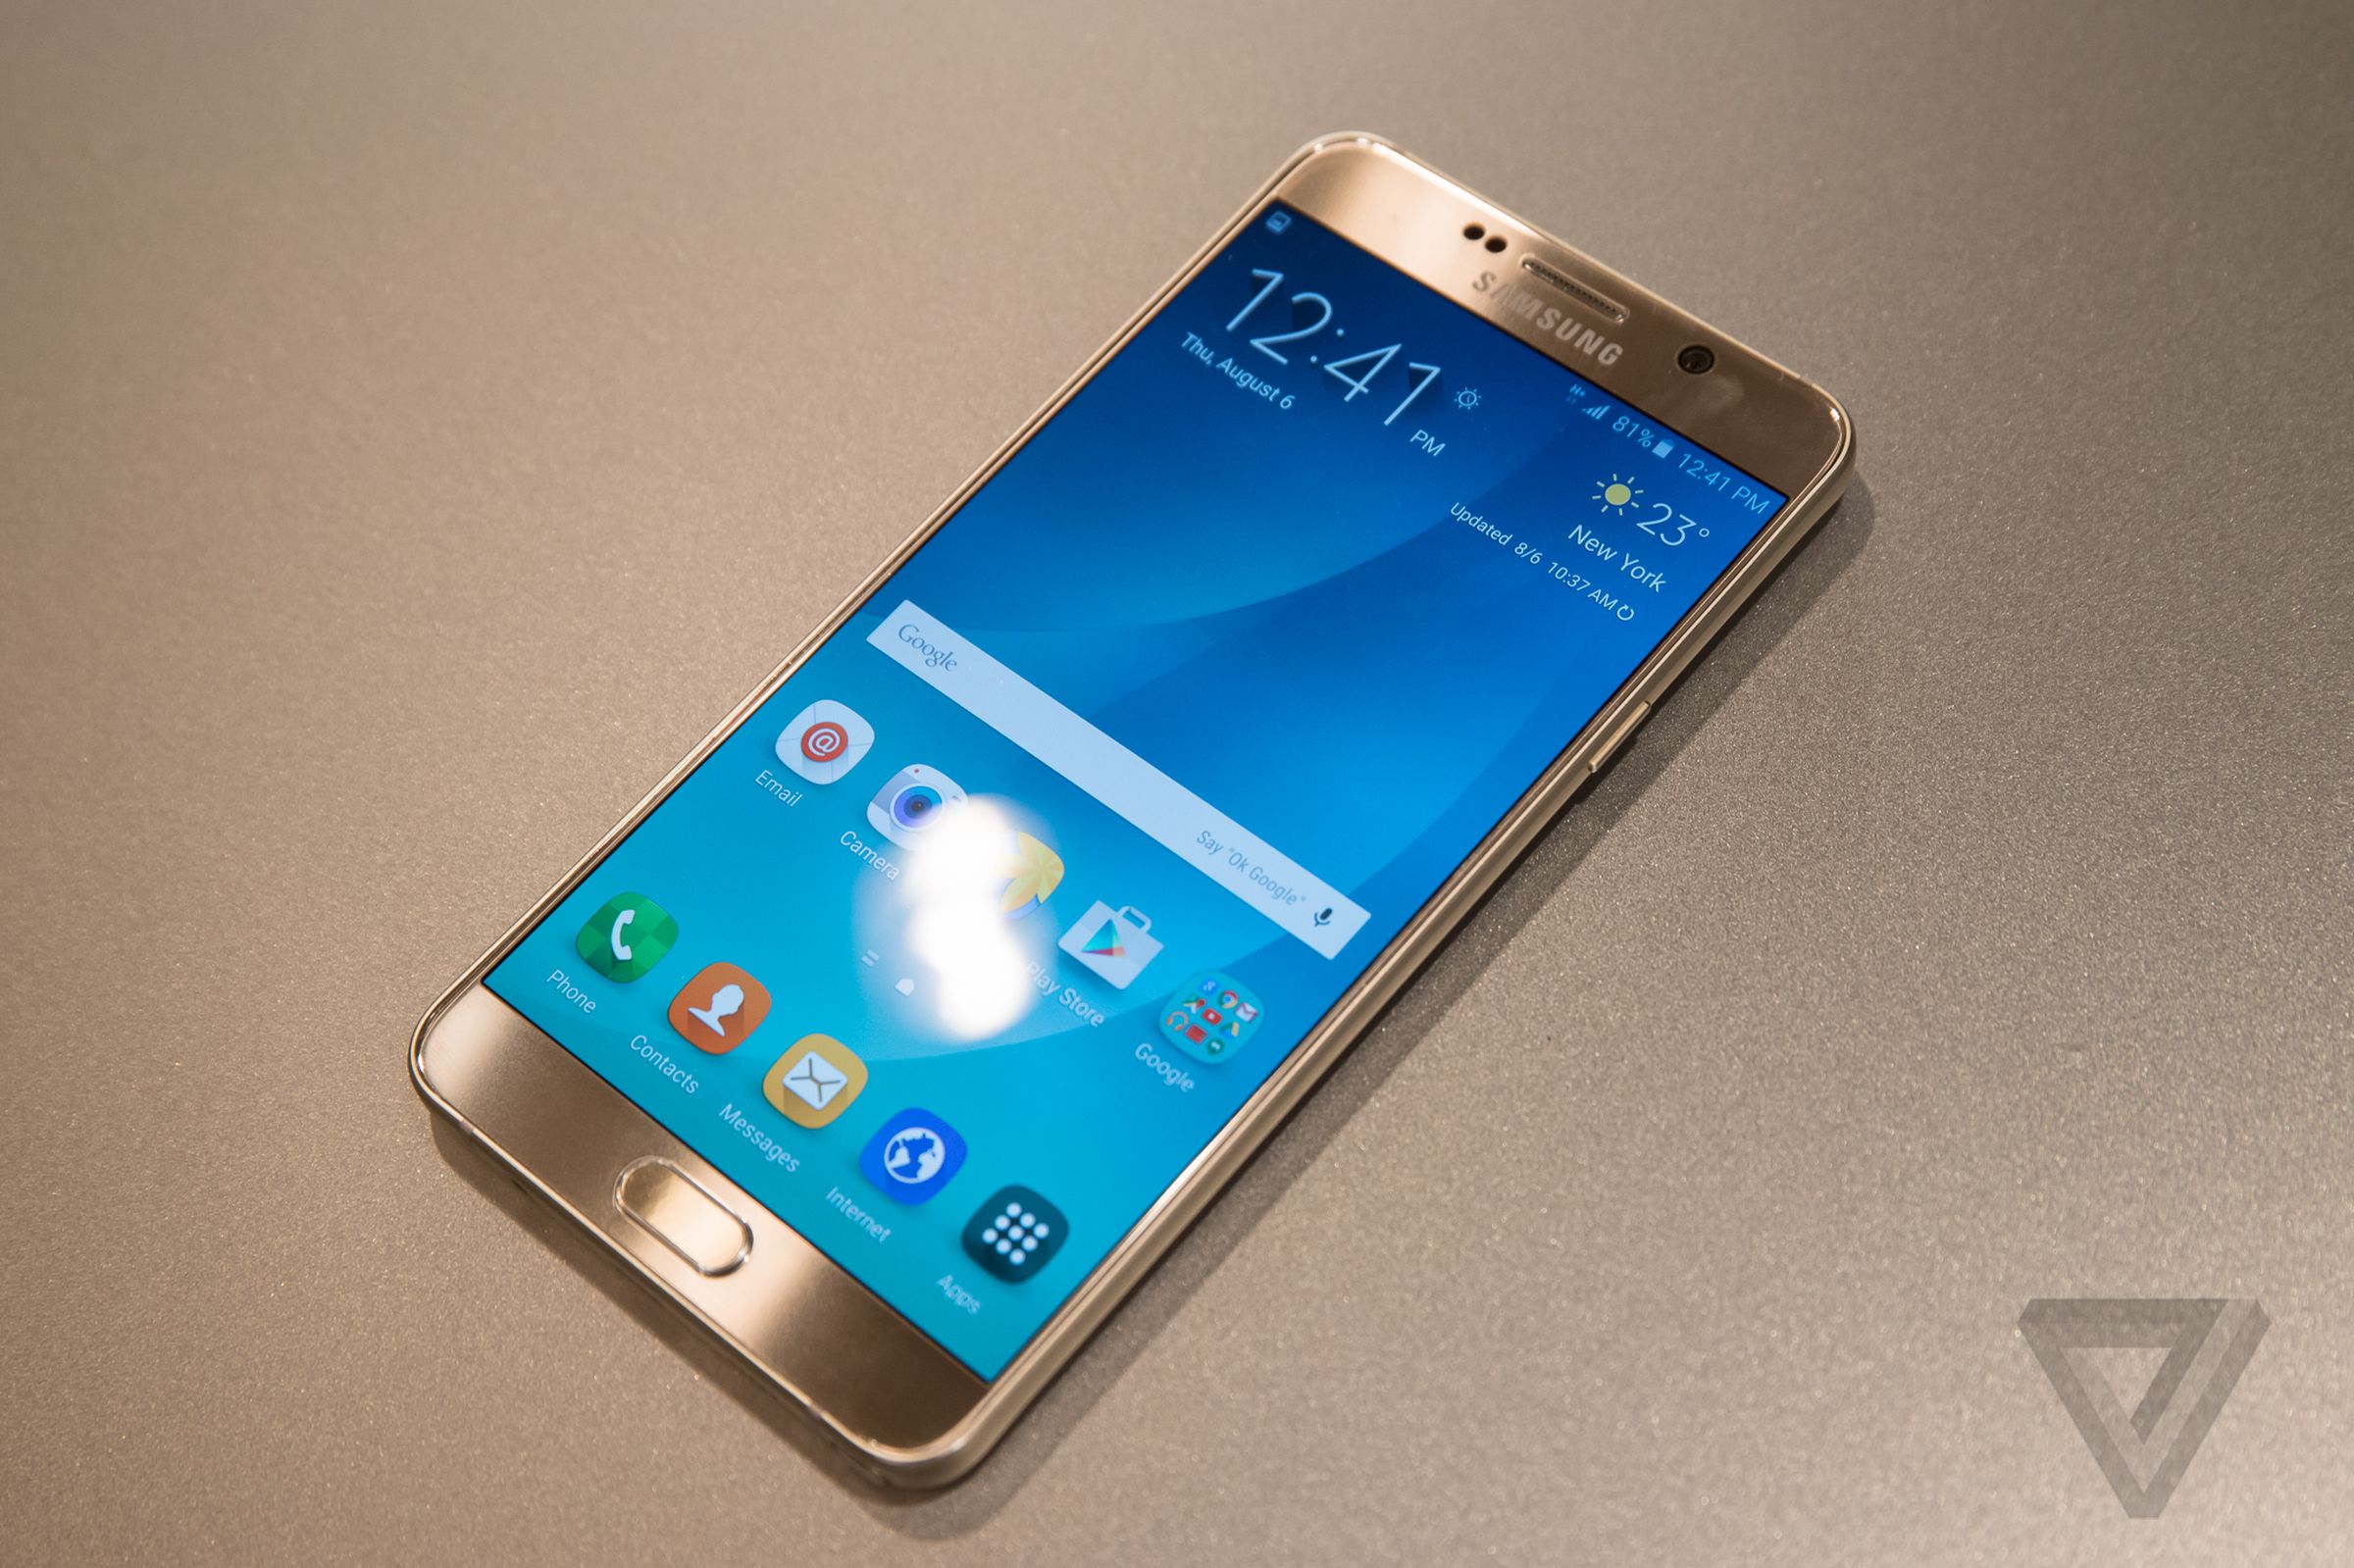 Samsung Galaxy Note 5 hands-on images